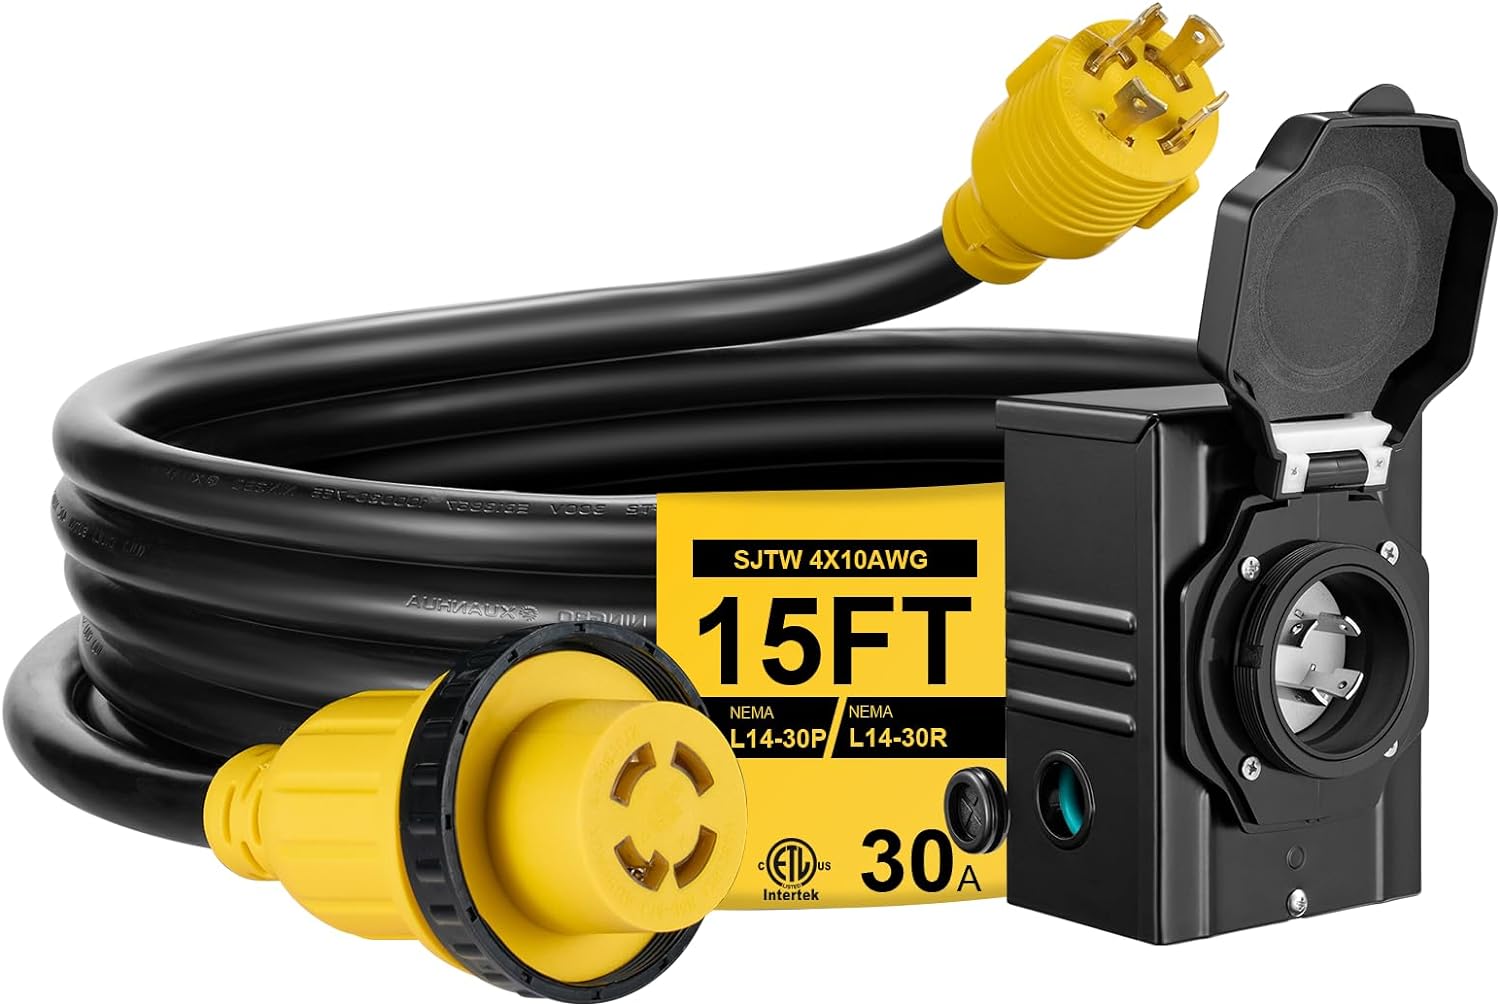 15FT 30 Amp Generator Cord with Pre-Drilled Power Inlet Box,Heavy Duty Generator Power Cord 4 Prong,125/250V,NEMAL14-30P/14-30R,Waterproof,ETL Listed,Home/RV Power Supply